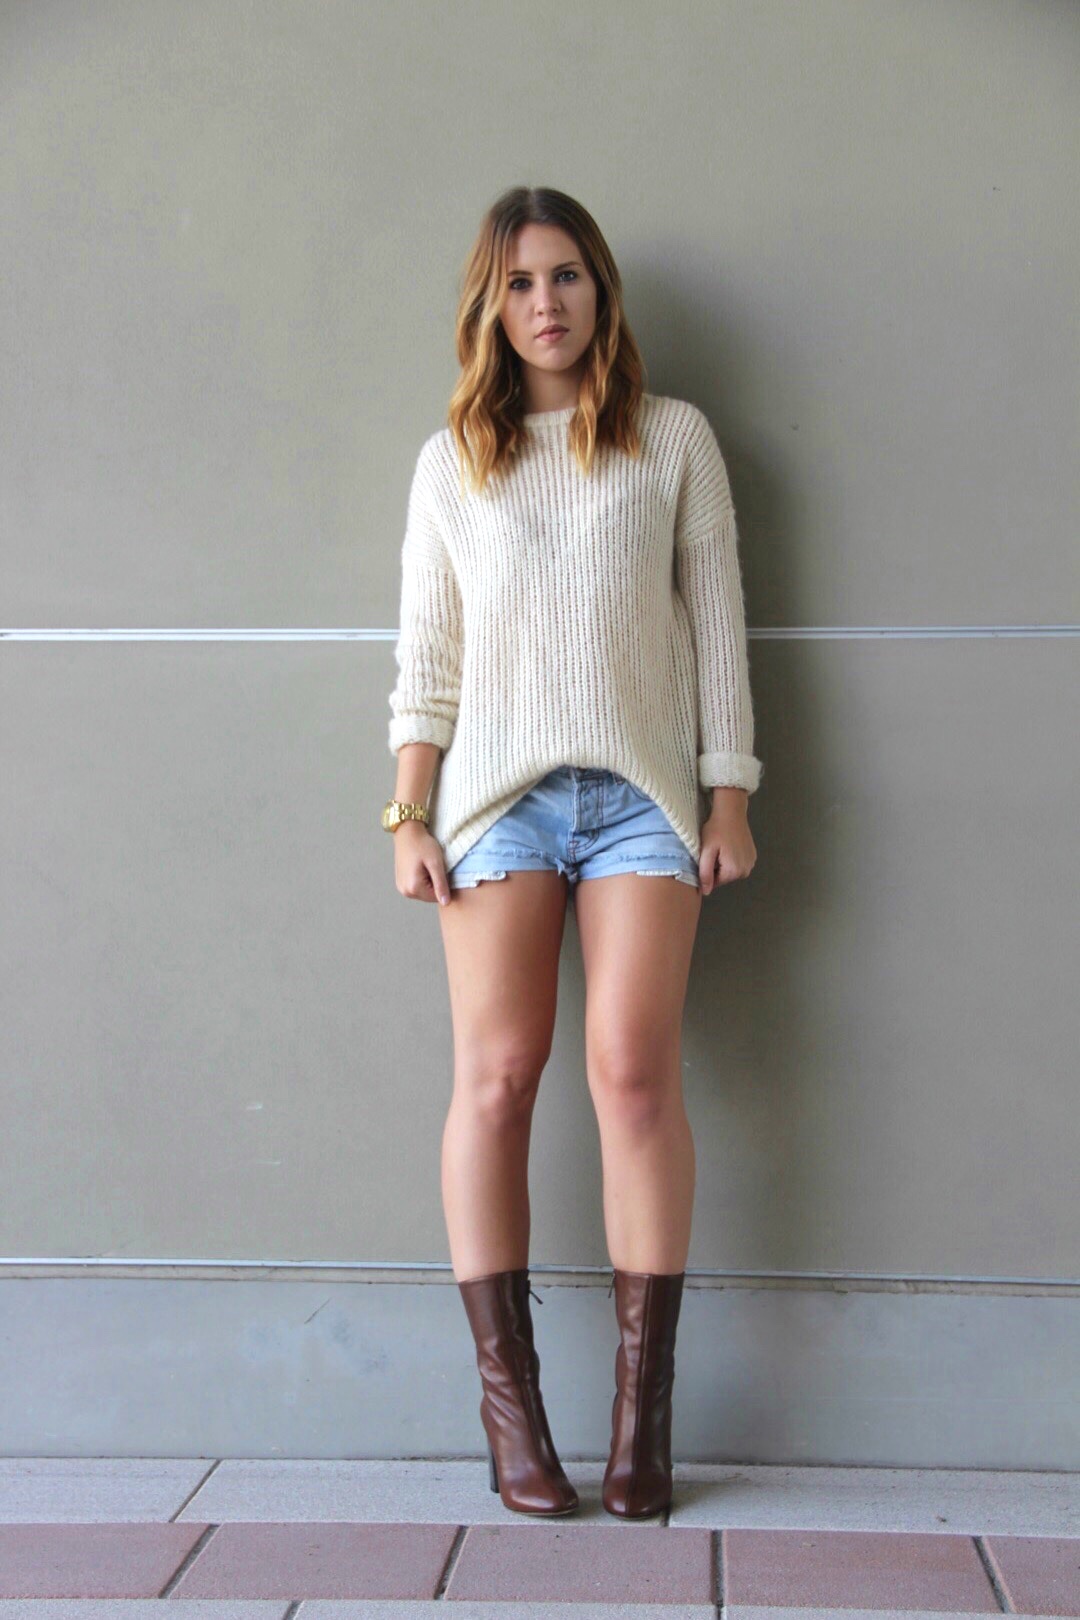 cute and simple outfit for those warm fall days | www.meganhofferth.com